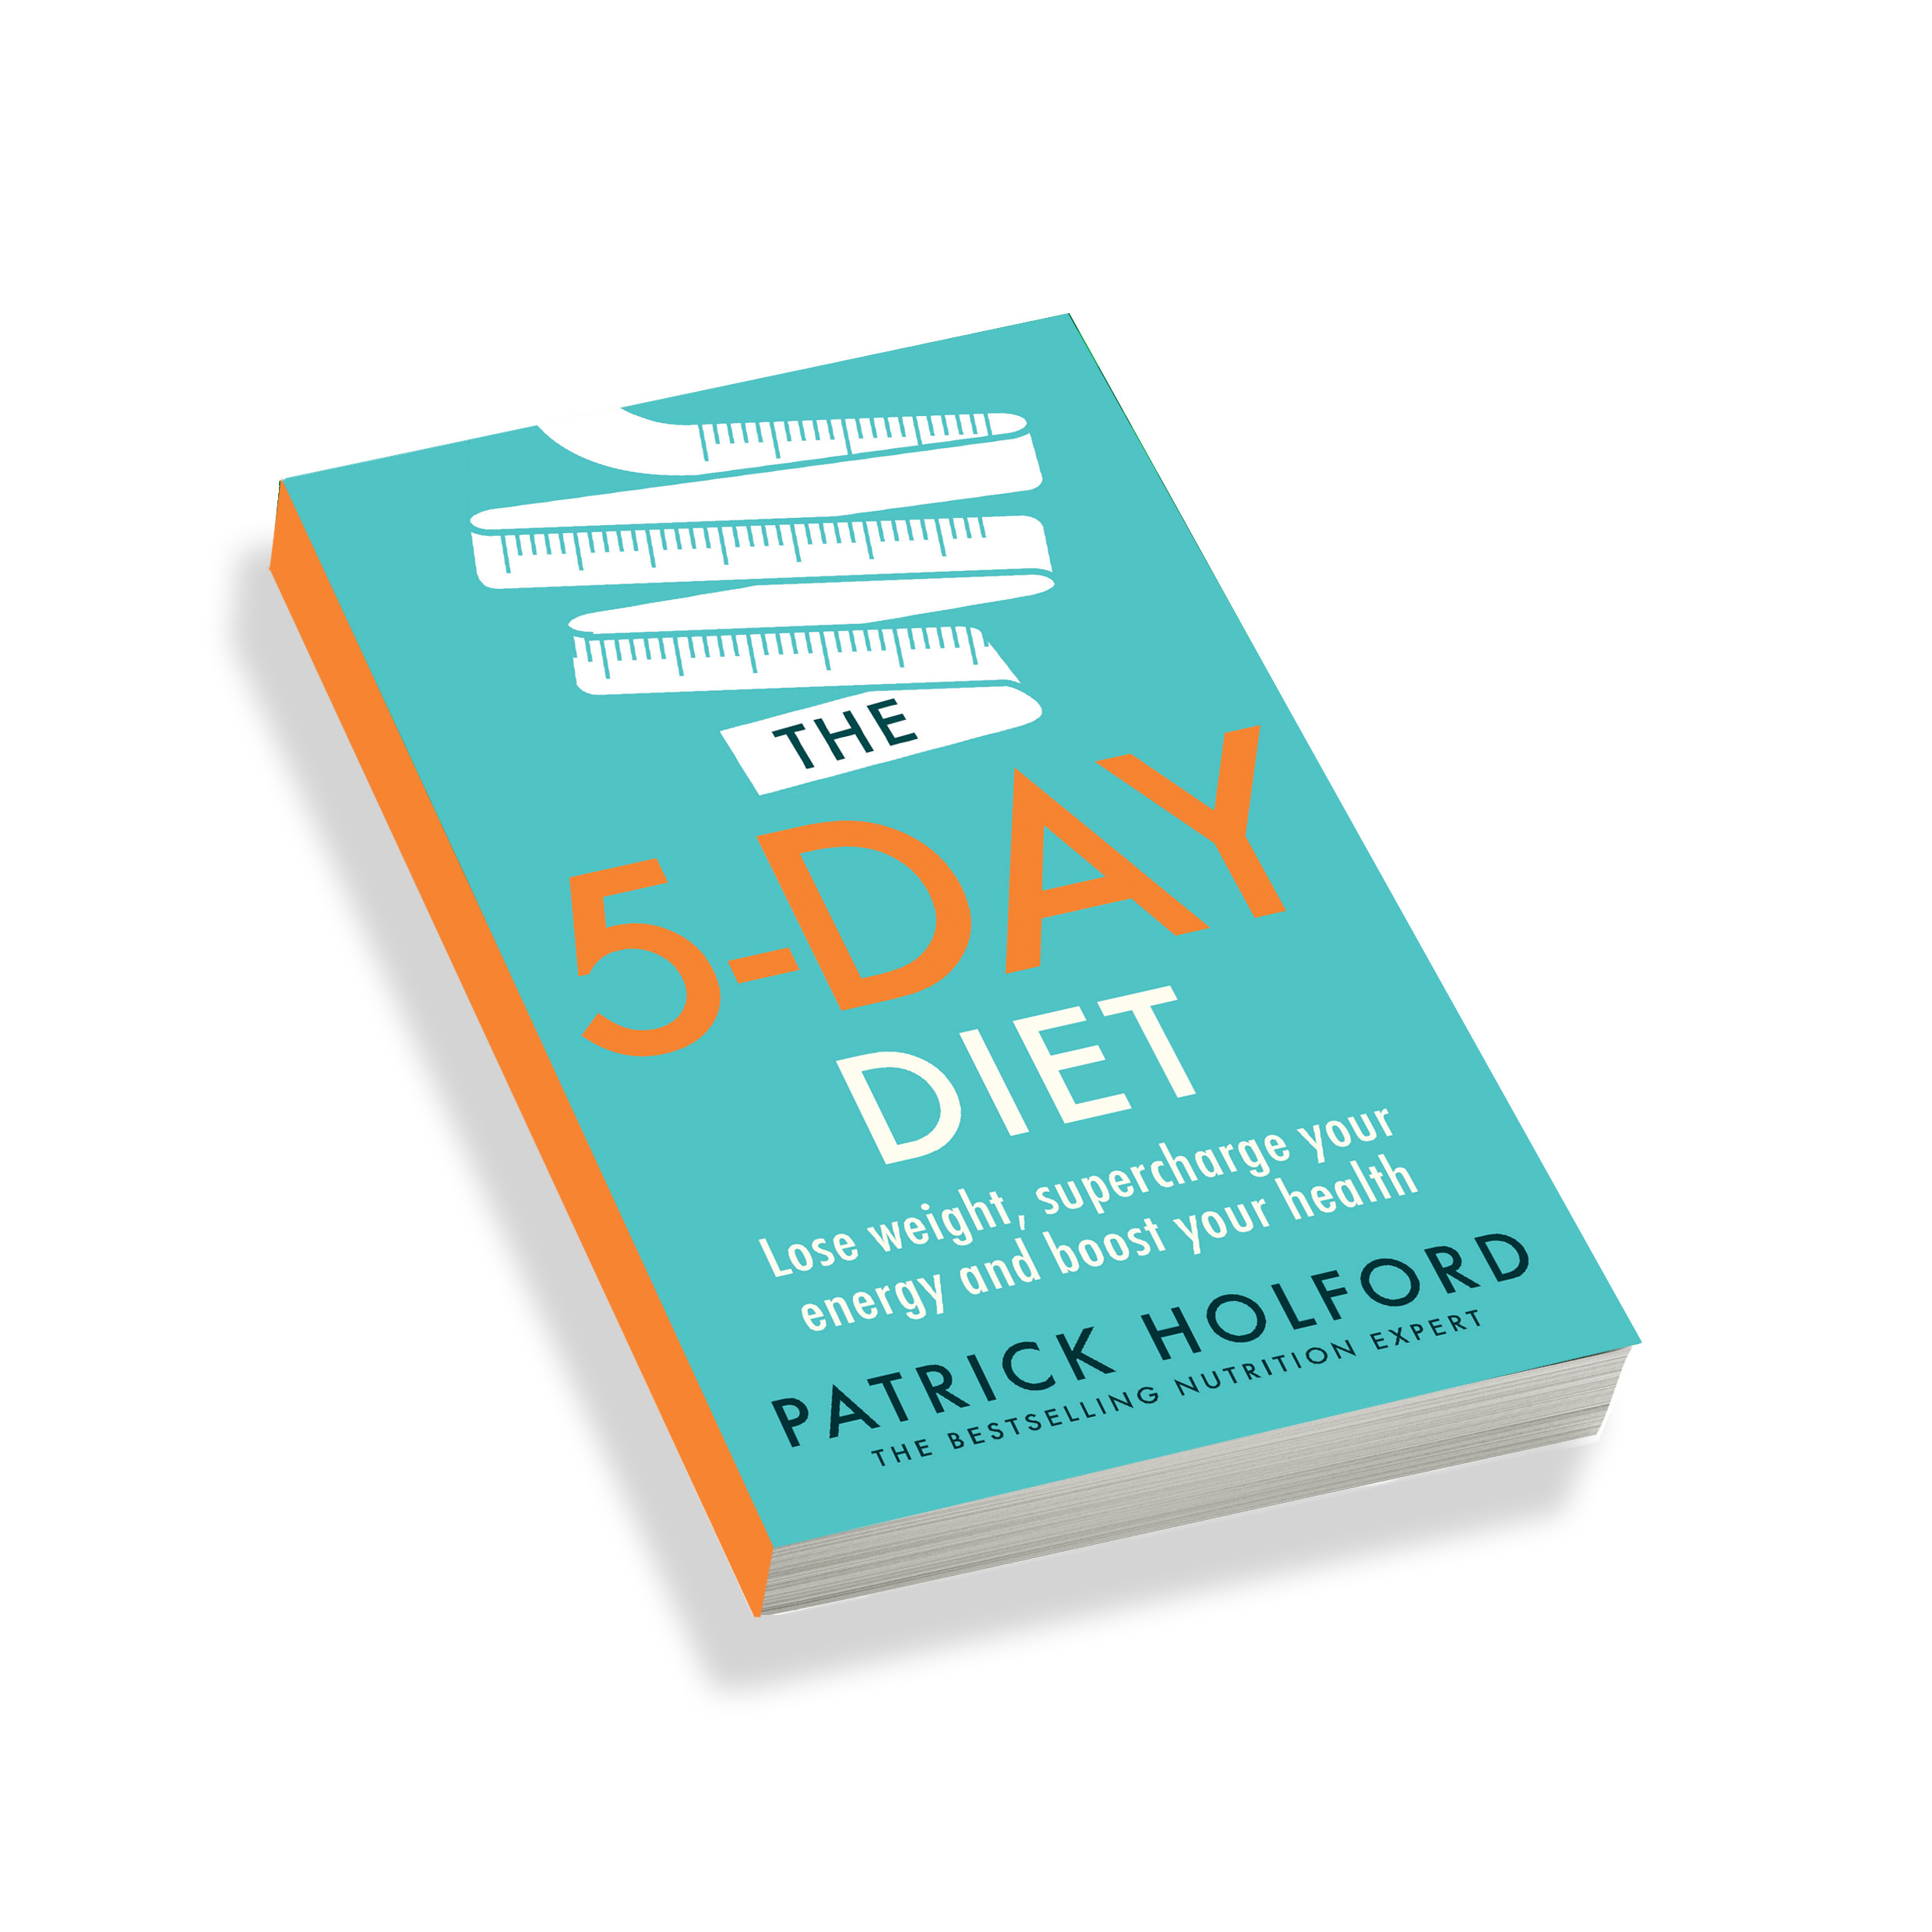 5 day diet Book cover